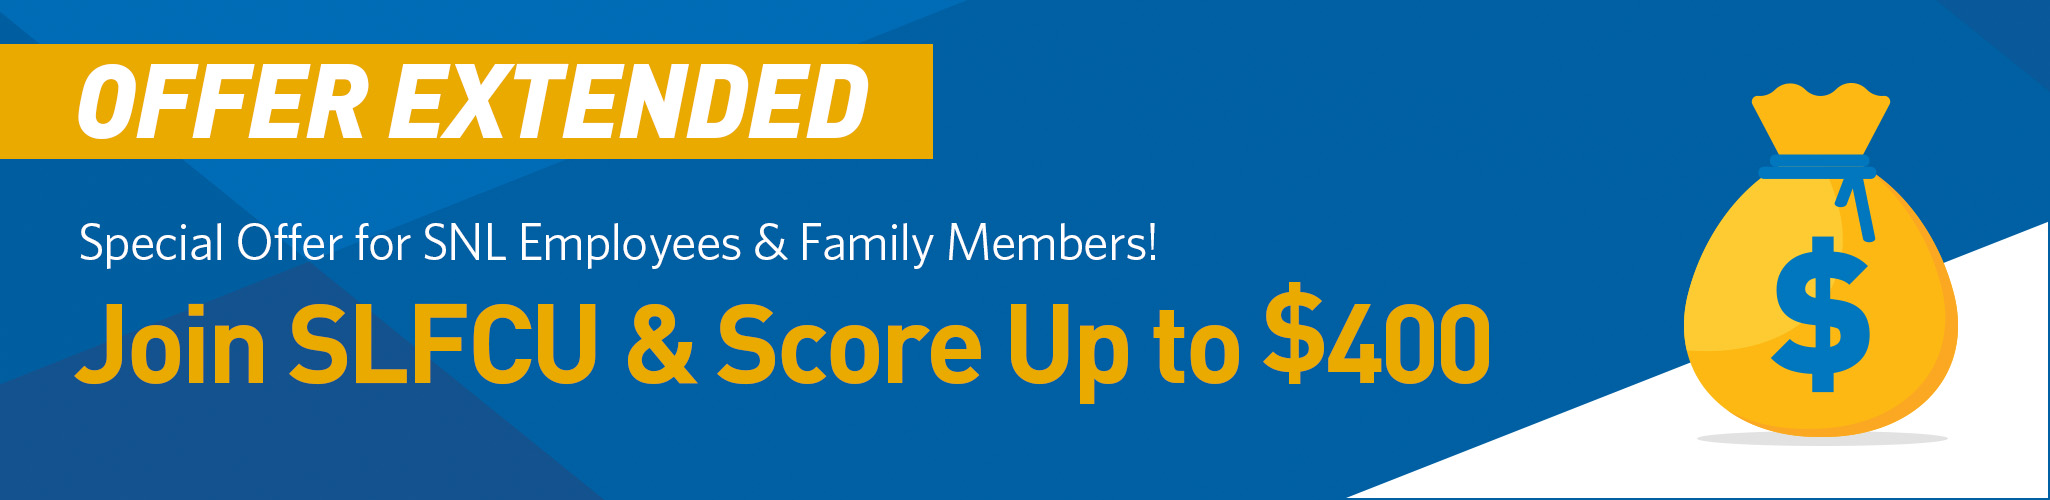 Special Offer for SNL, LLNL & LANL Employees & Family Members: Join SLFCU & Score Up to $400